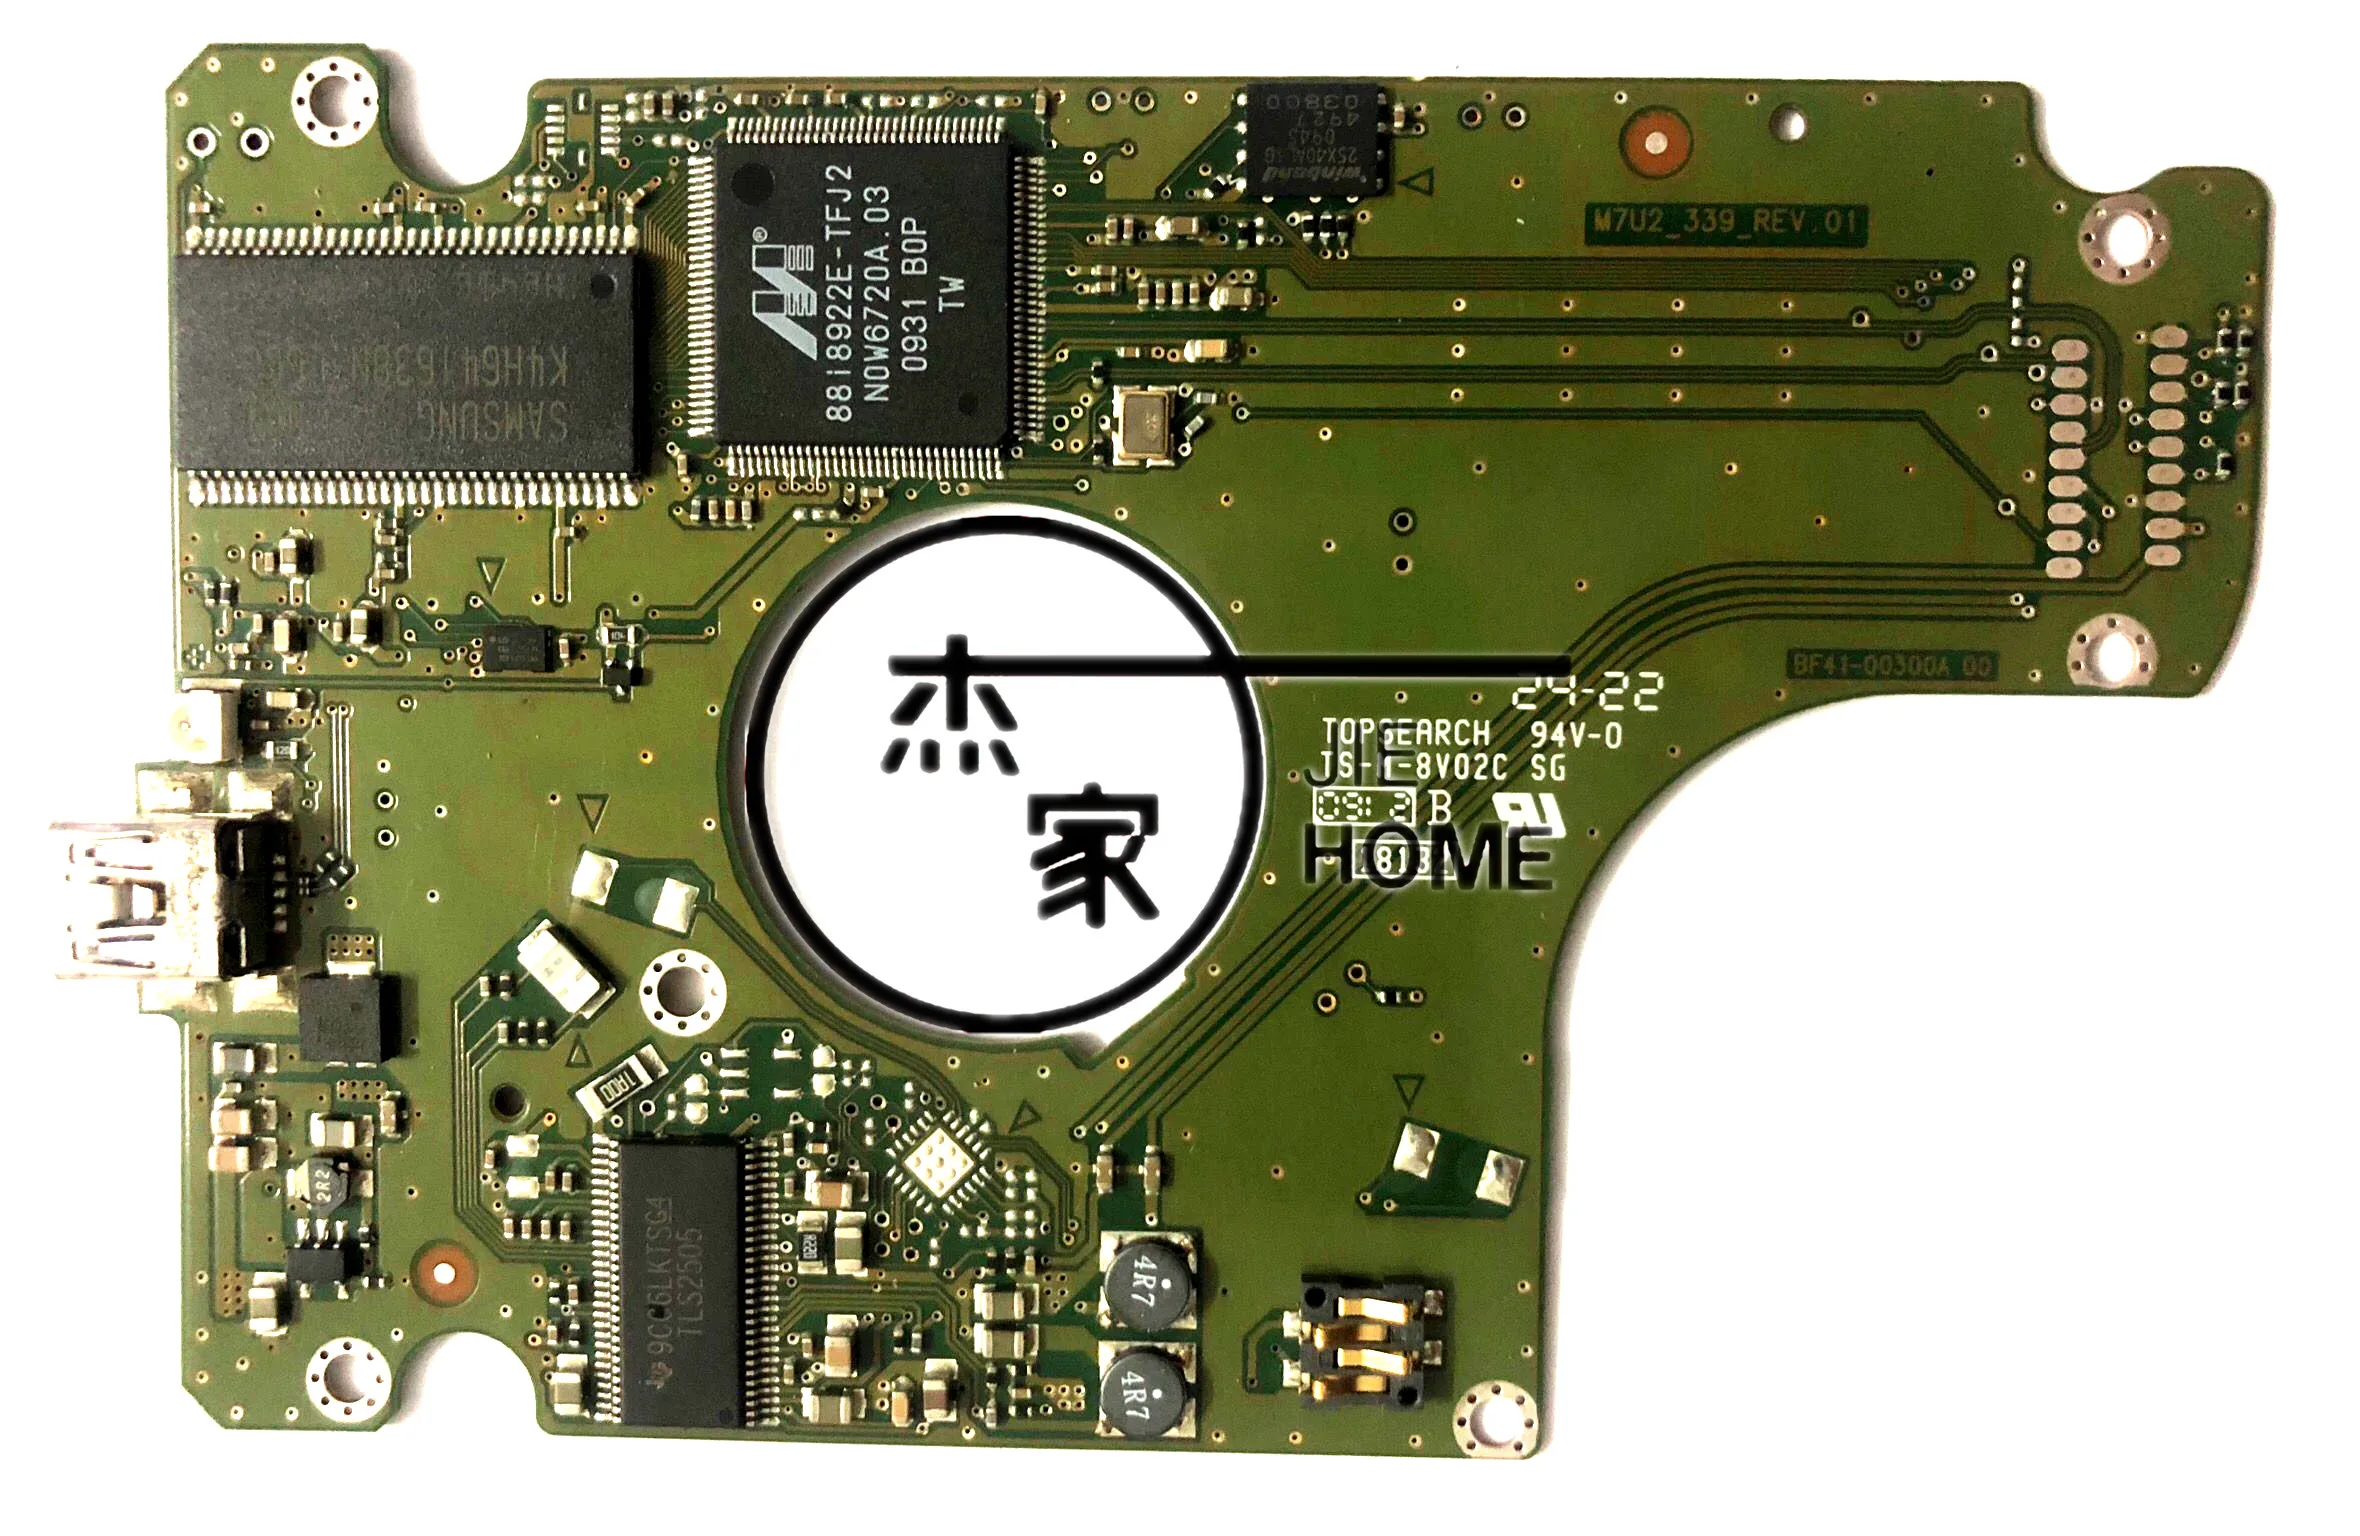 

USB 2.0 Hard Drive Parts PCB Board BF41-00300A M7U2_339_REV.01 R00 for 2.5 Samsung HDD Data Recovery